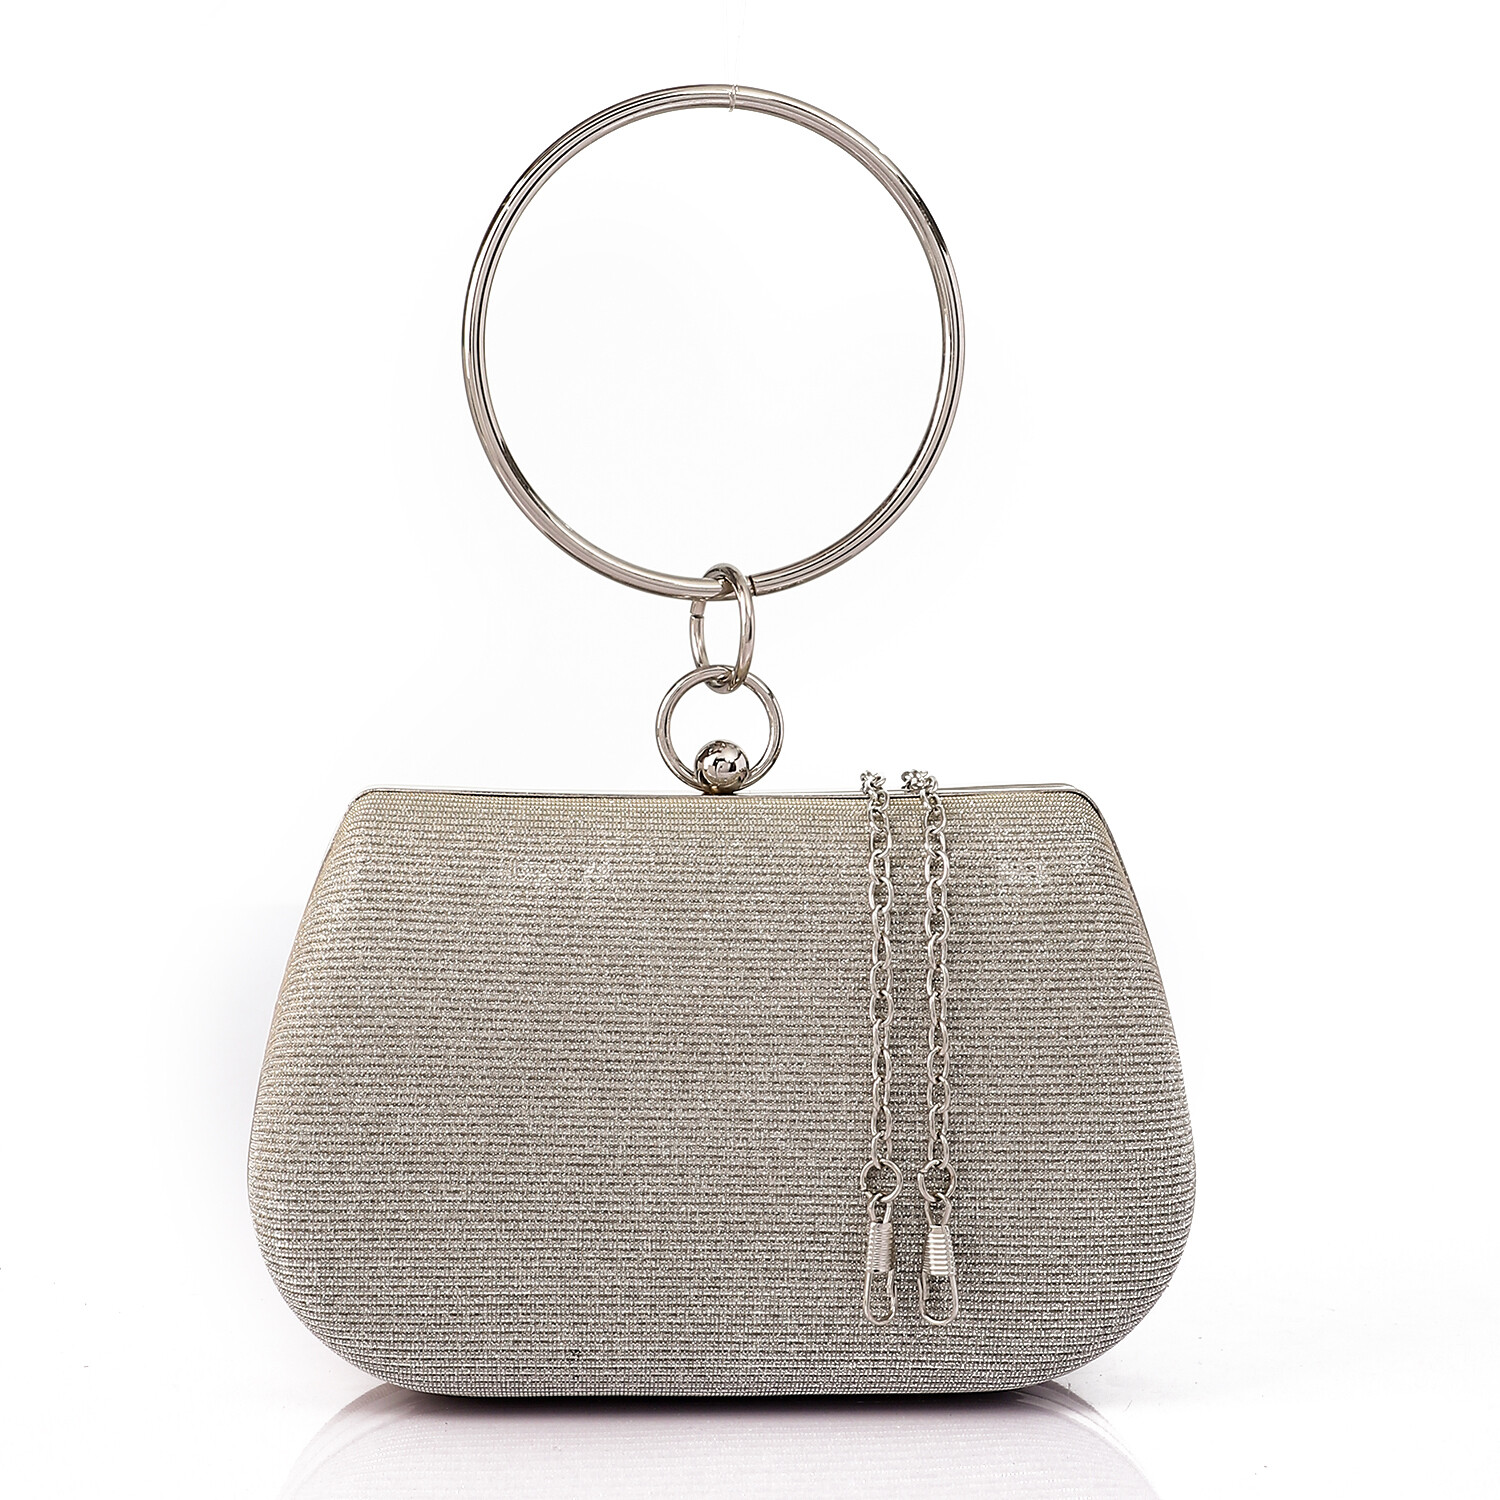 Glittery Silver Clutch with Decorative Cicular Handle-4941